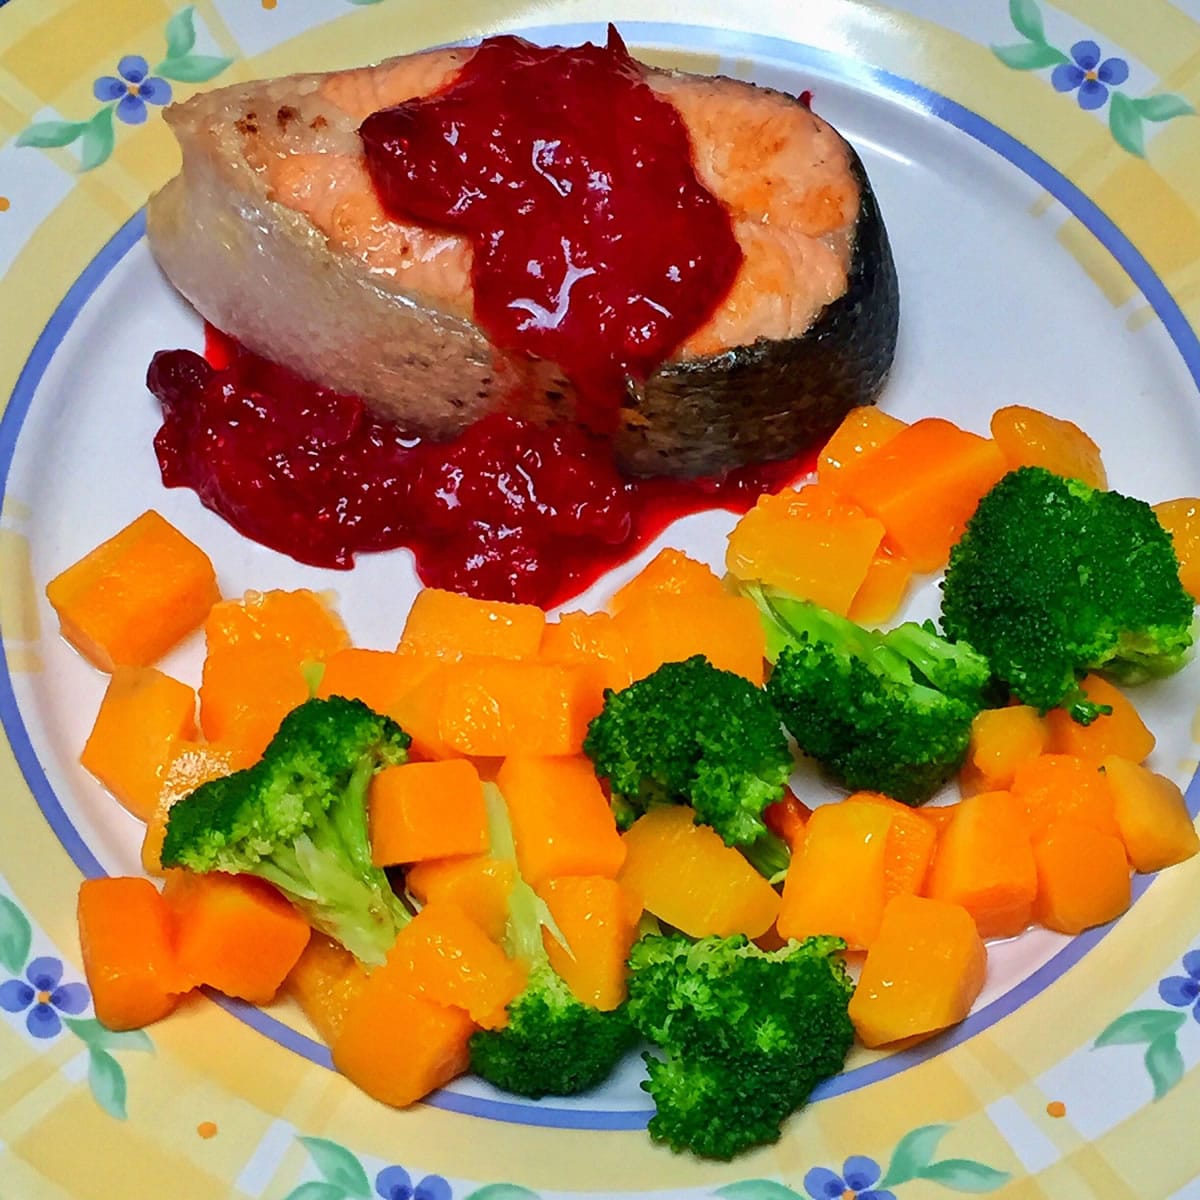 Salmon with cranberry-mustard sauce and a side of butternut squash and broccoli is full of seasonal flavors.